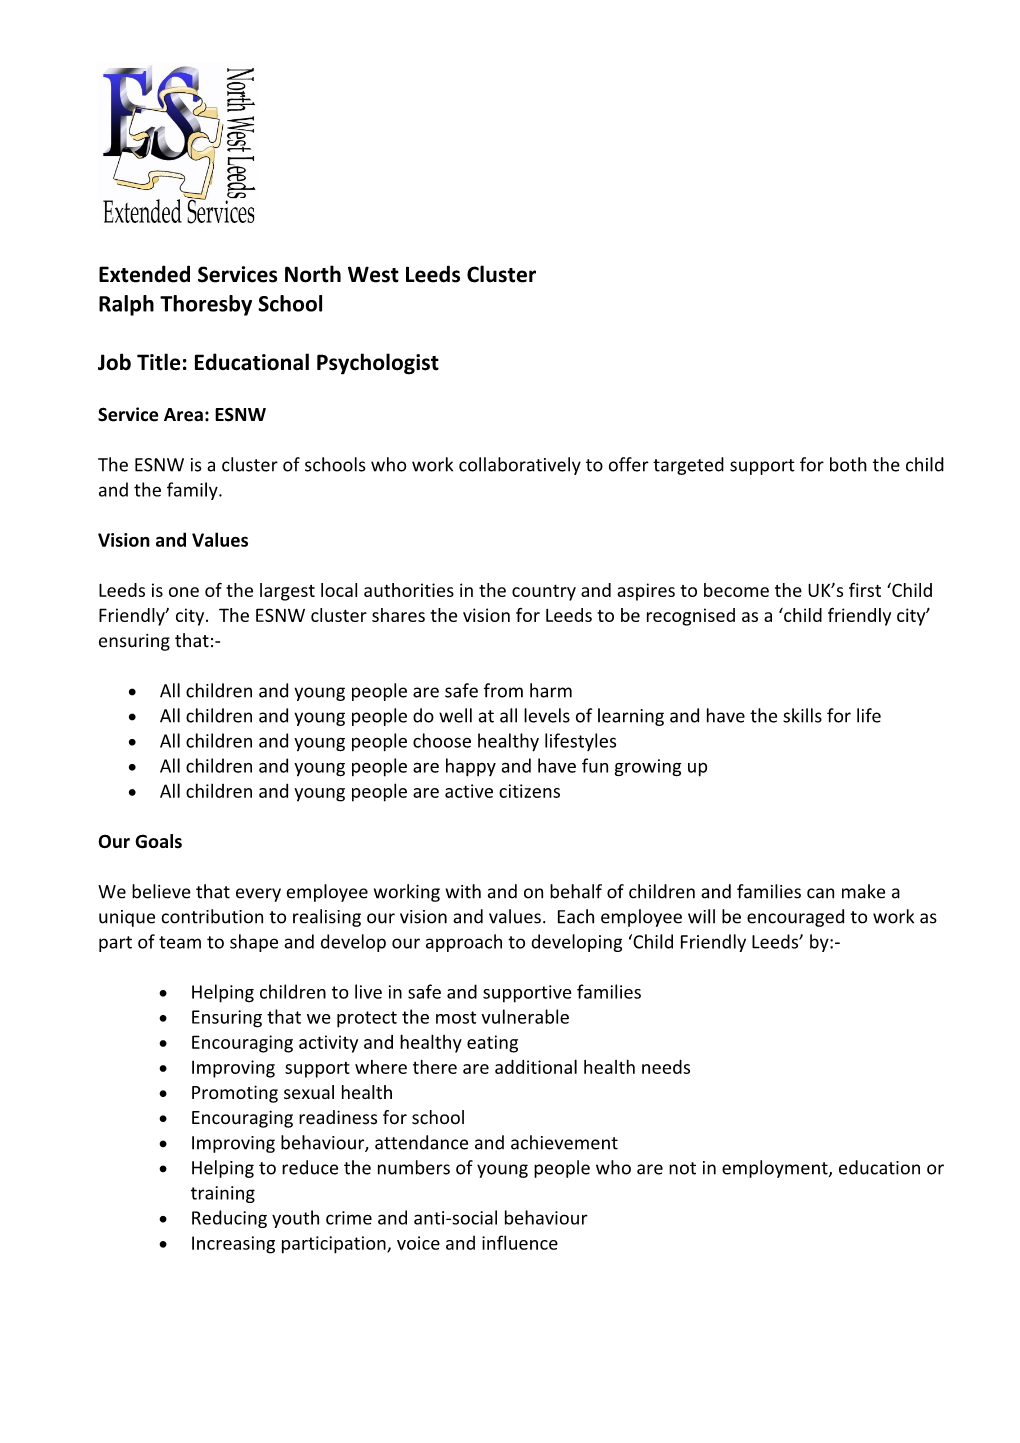 Extended Services North West Leeds Cluster